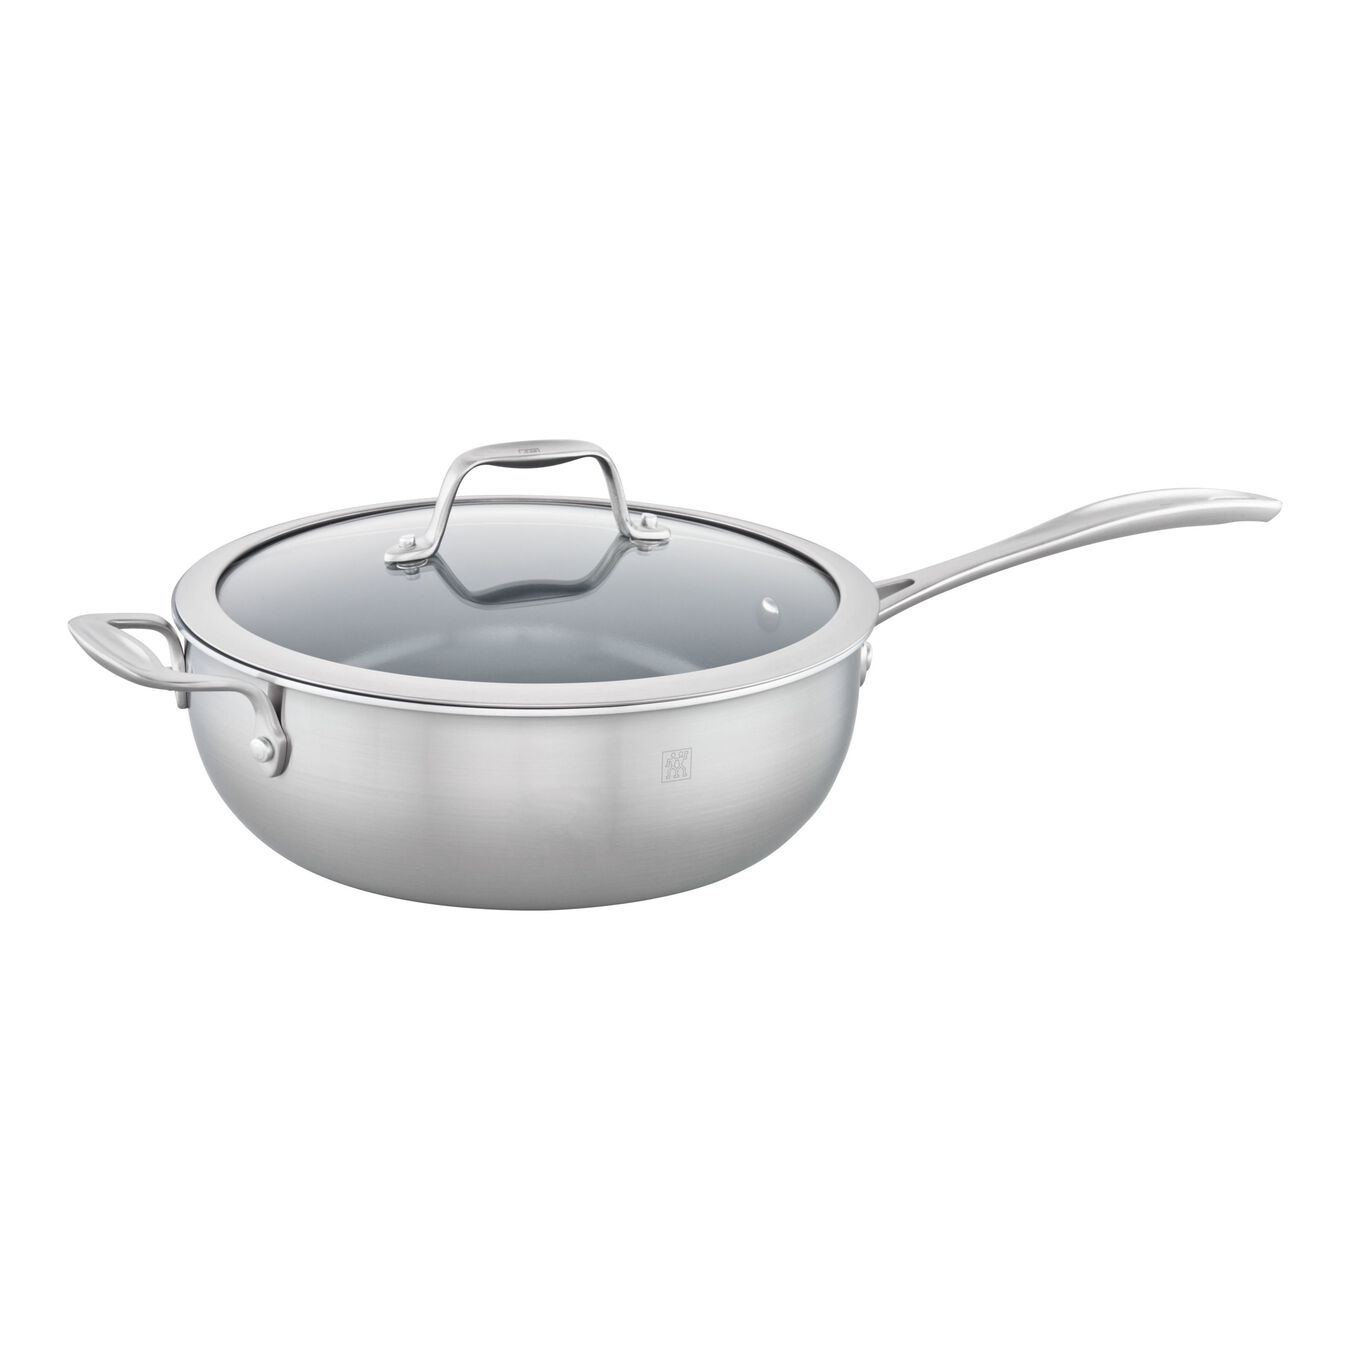 25 cm 18/10 Stainless Steel Saute pan,,large 1